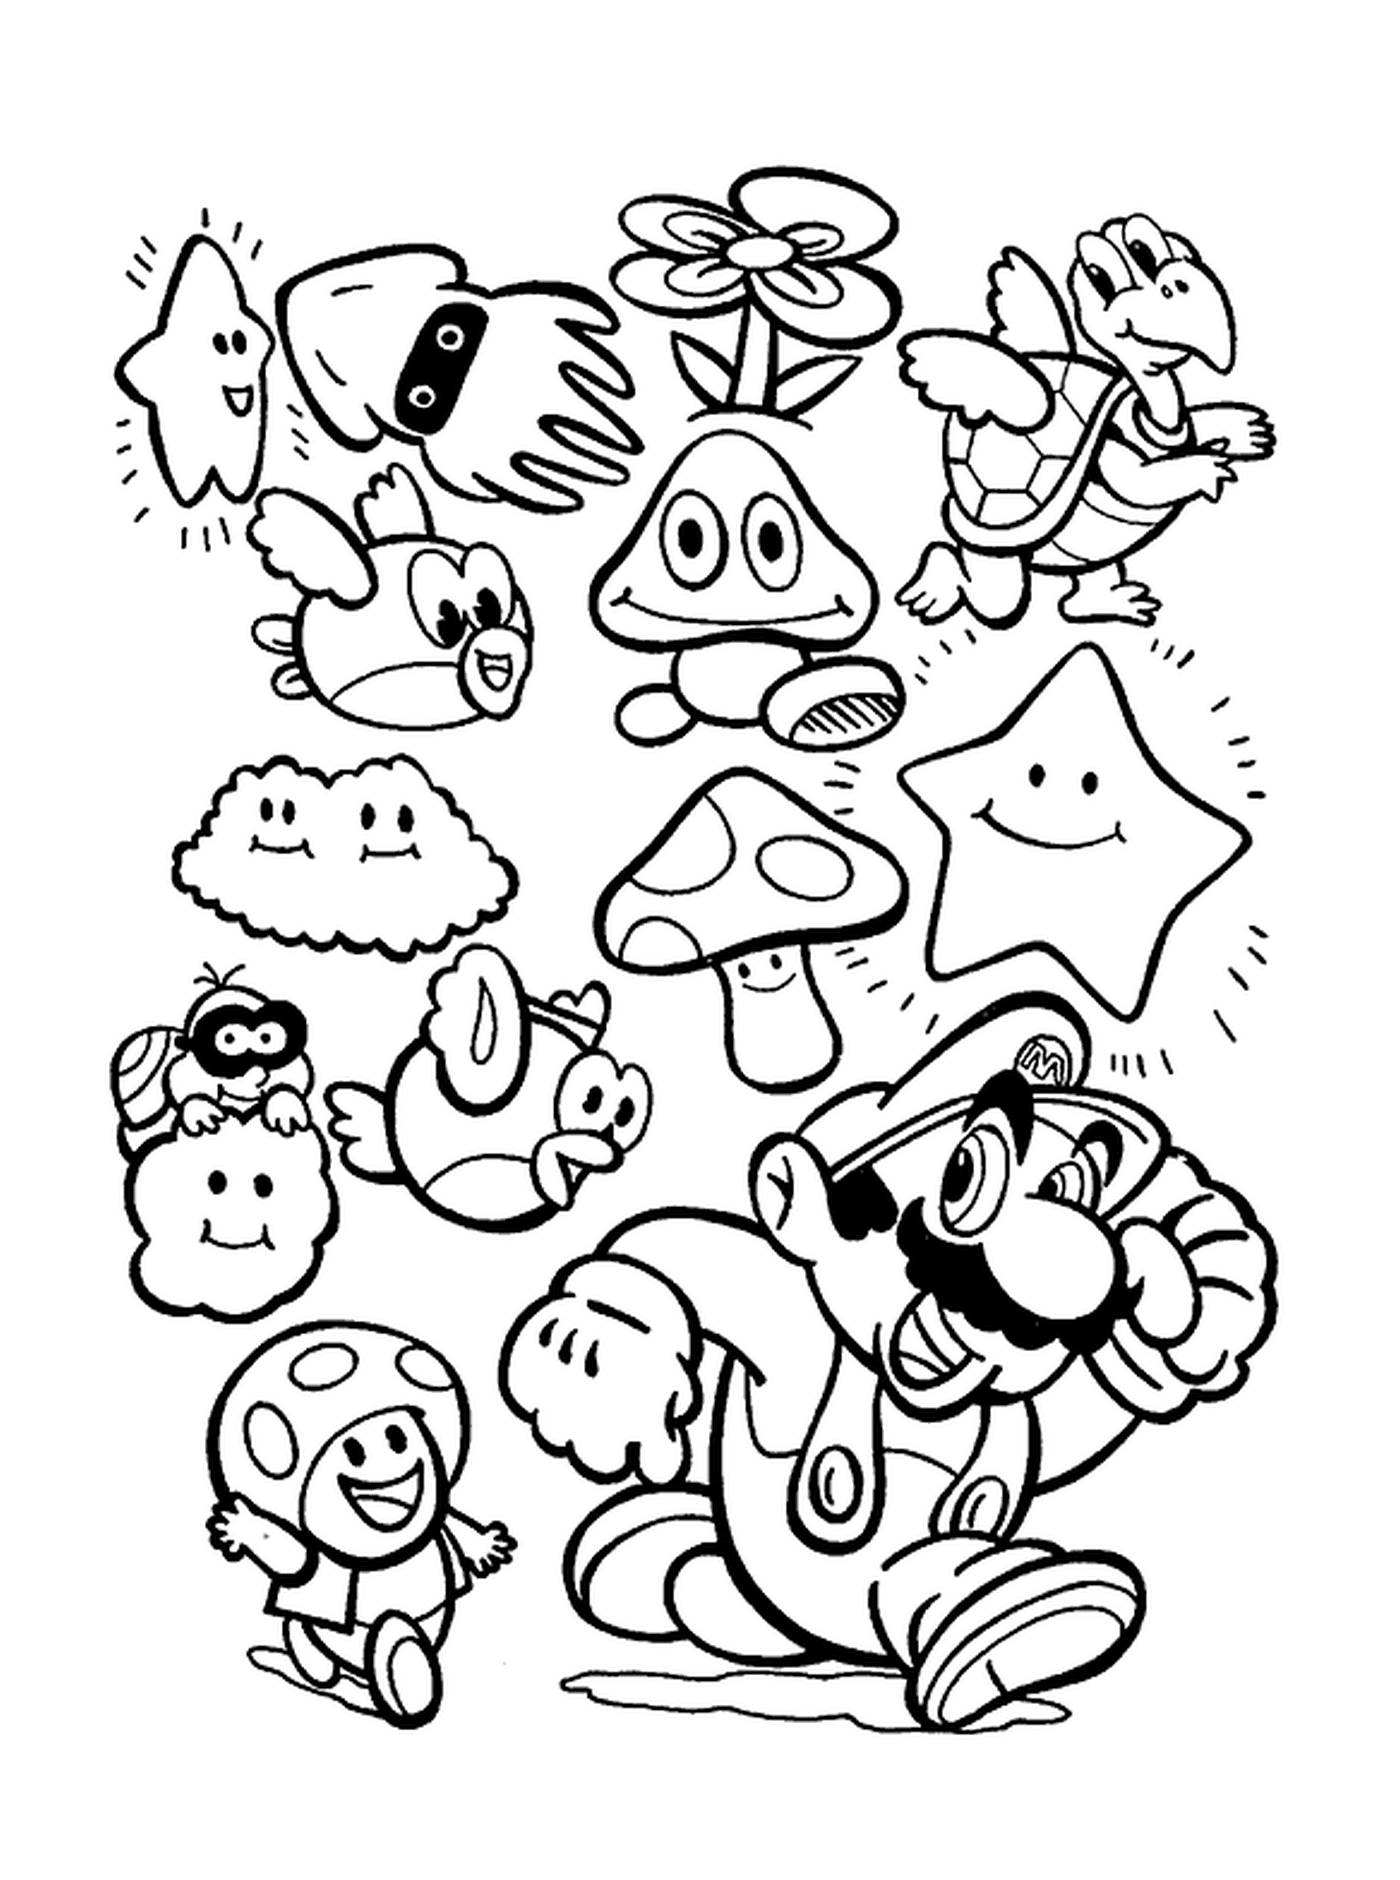  Mario's characters come together 